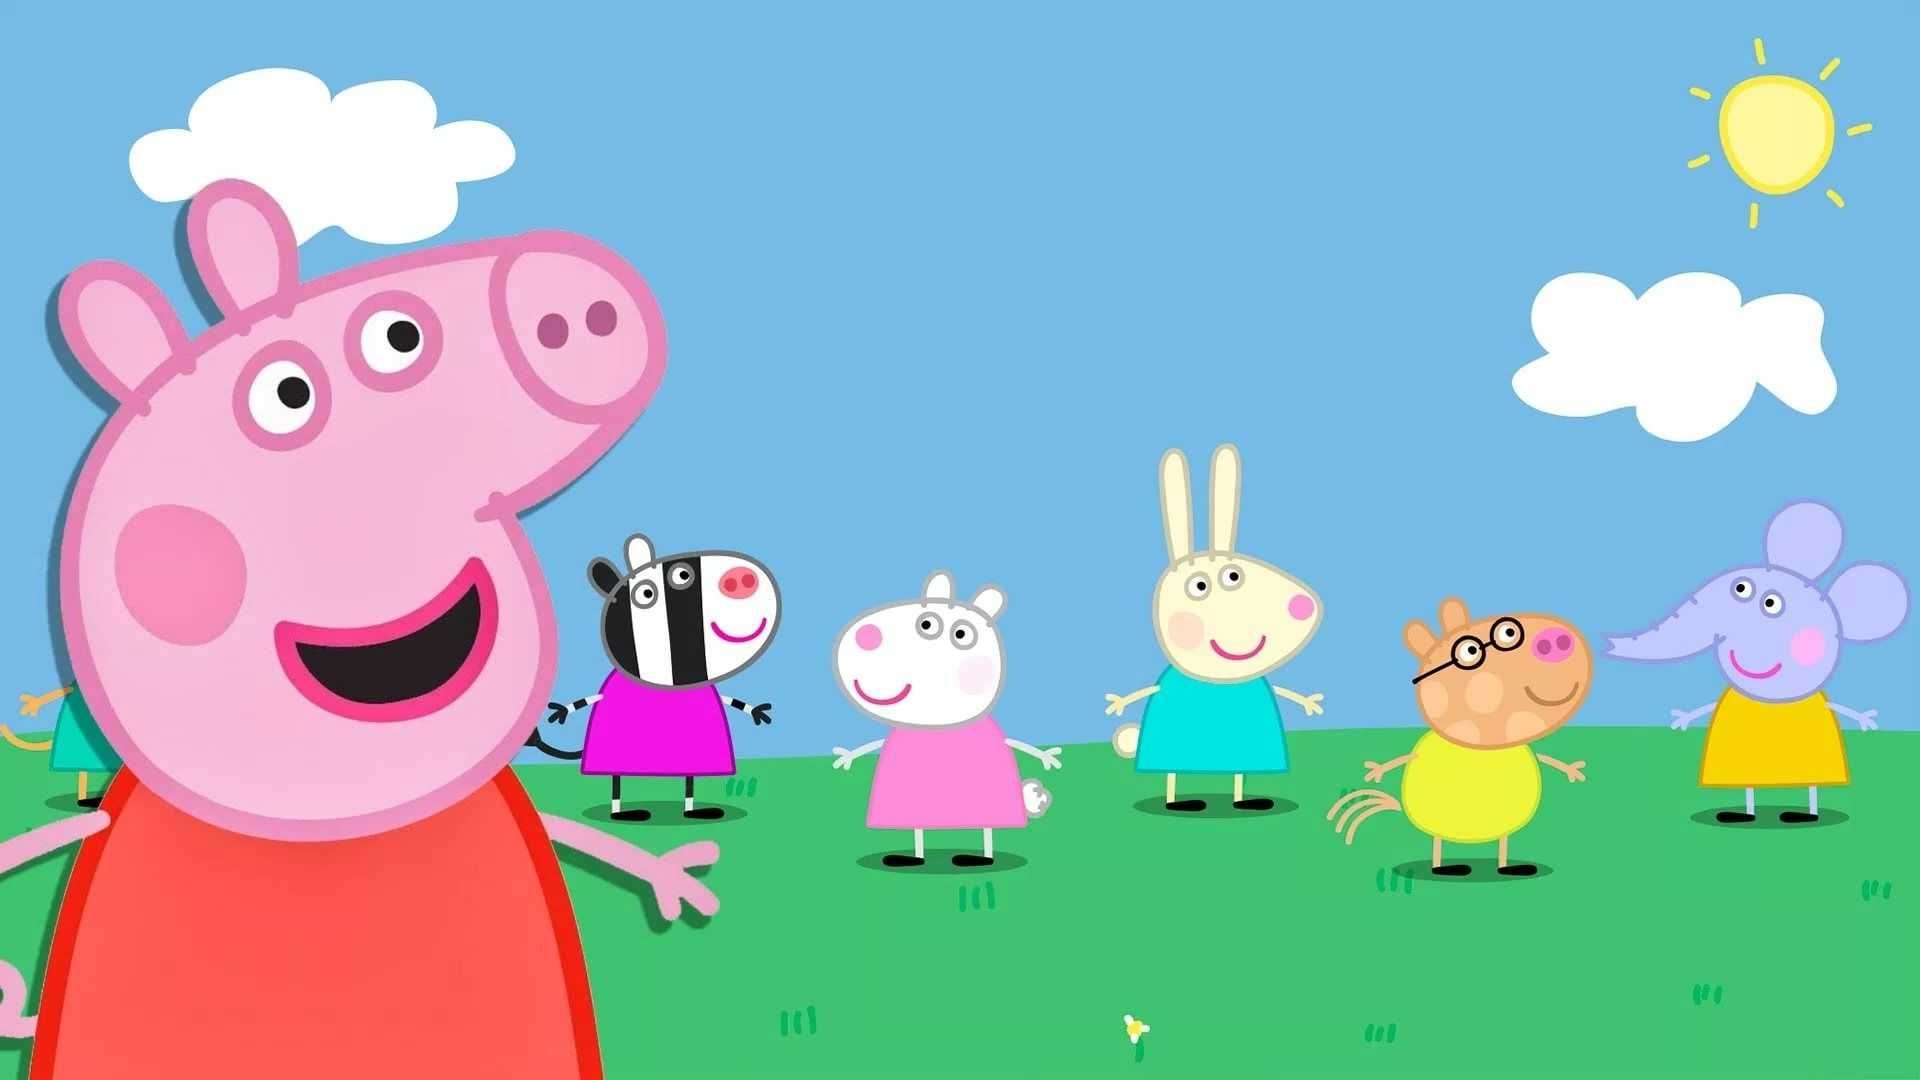 Get 100 Peppa Pig House Wallpapers  Backgrounds For FREE In Just A Few  Clicks  AMJ